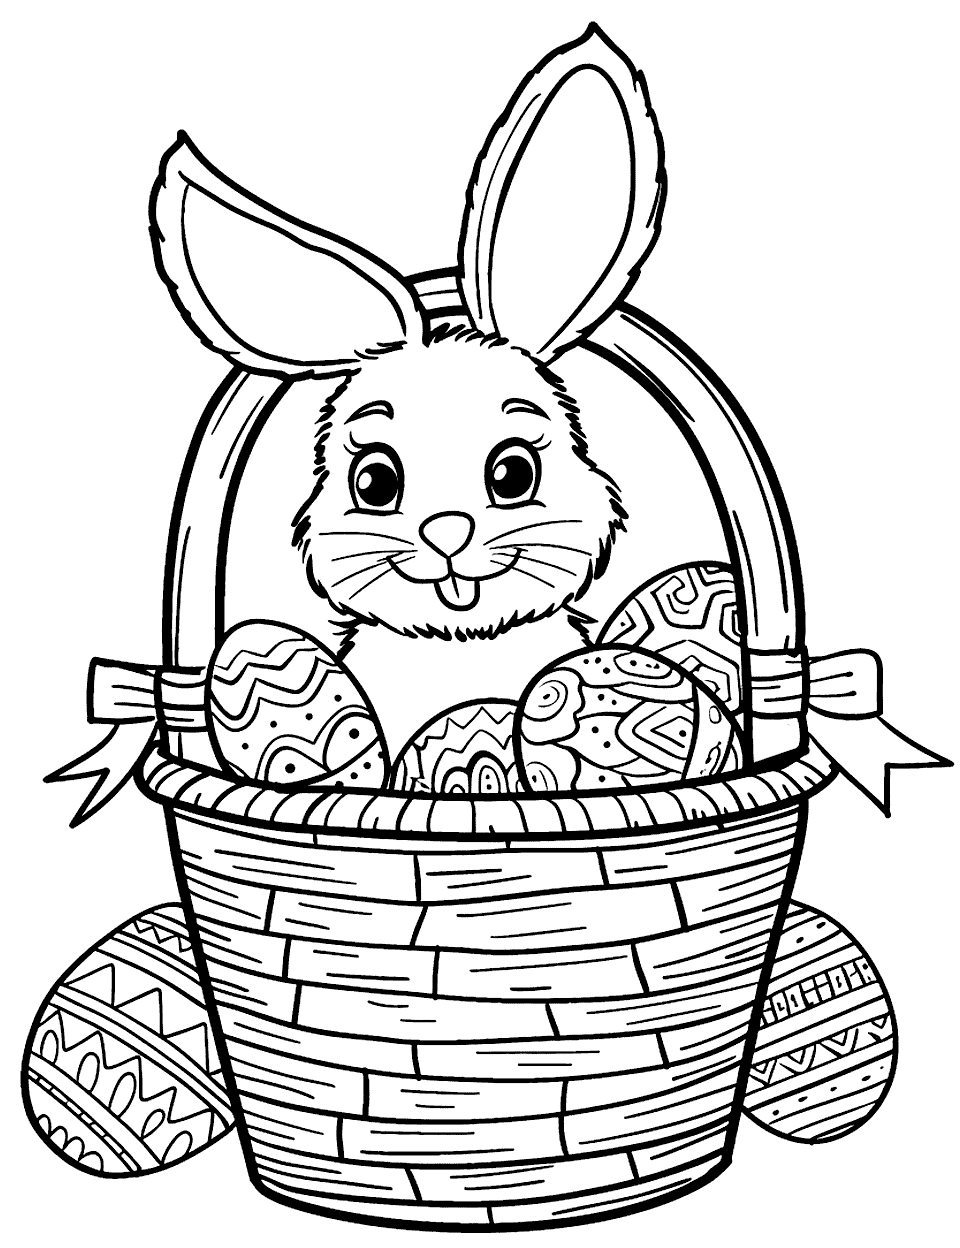 Easter Basket Surprise Bunny Coloring Page - A cute bunny peeking out of a large Easter basket filled with decorated eggs and ribbons.